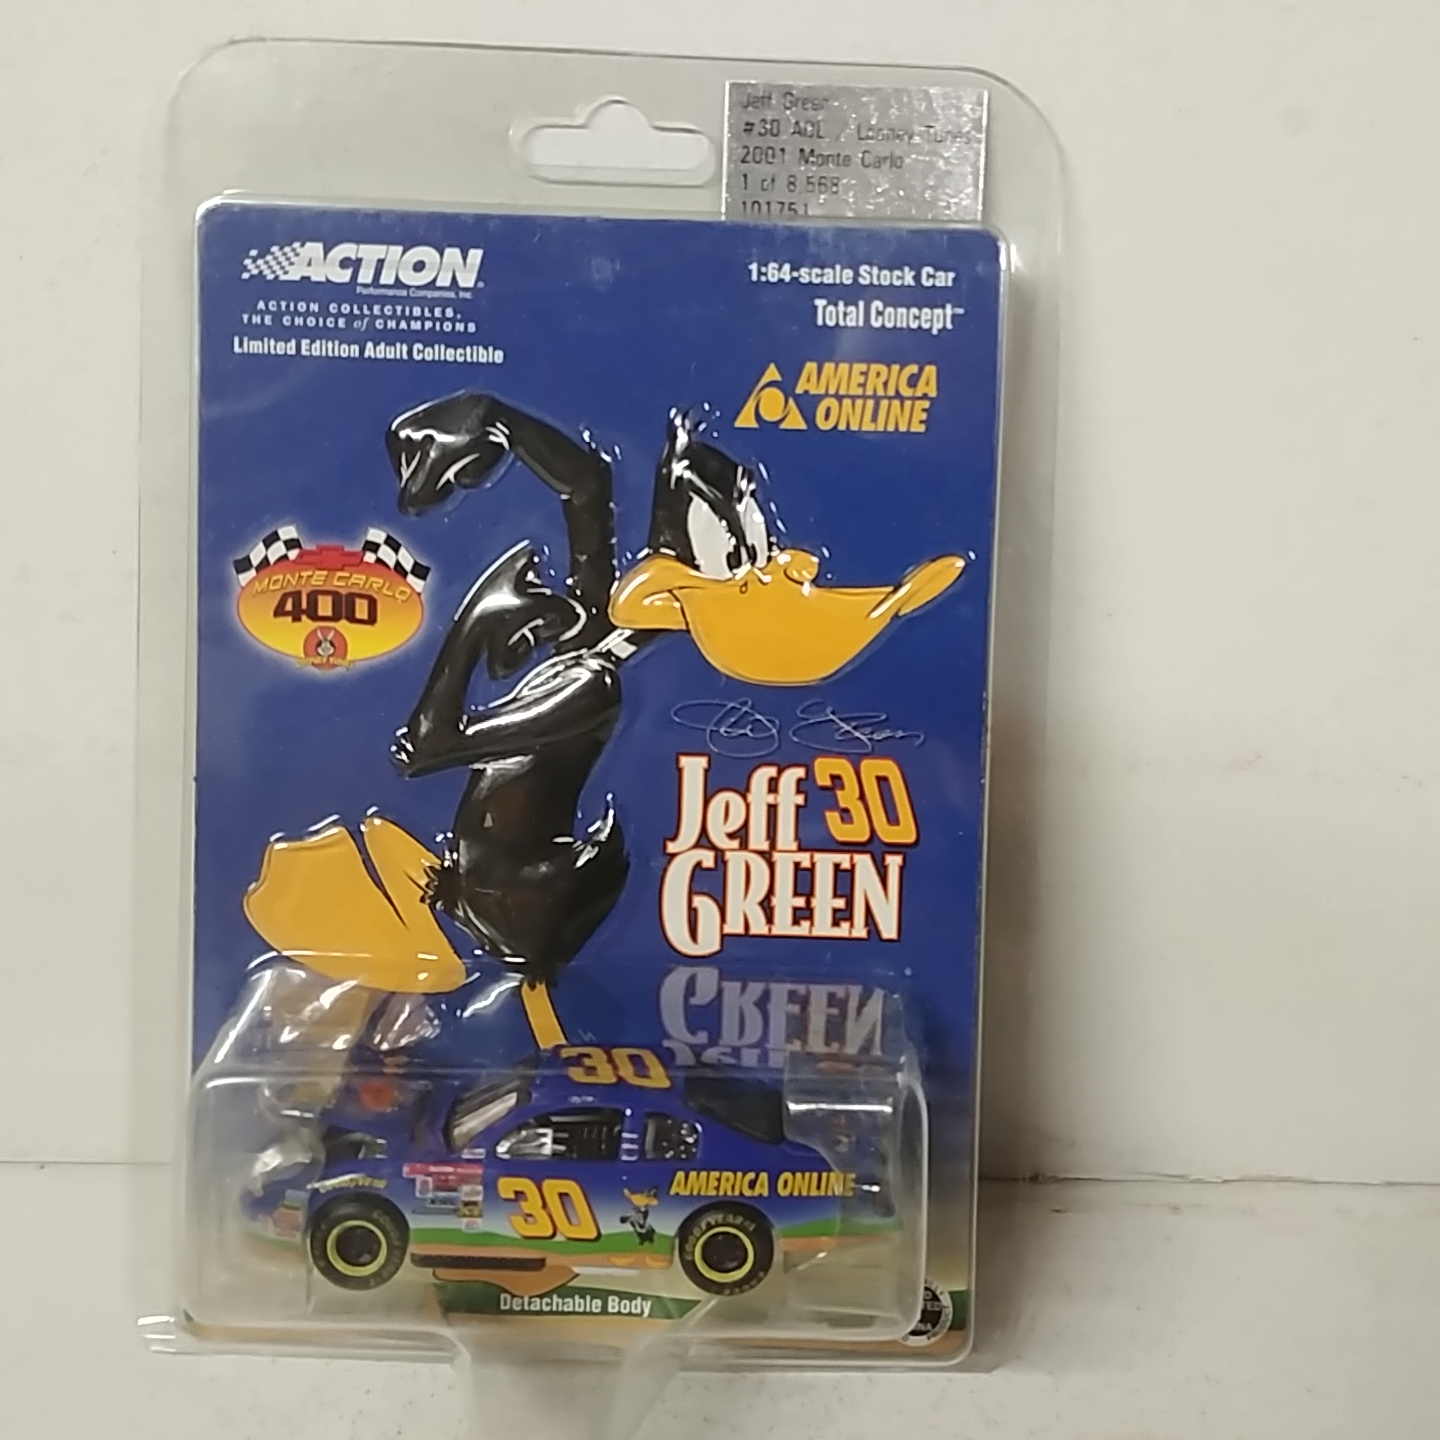 2001 Jeff Green 1/64th AOL "Looney Tunes Daffy Duck" Total Concept ARC Monte Carlo